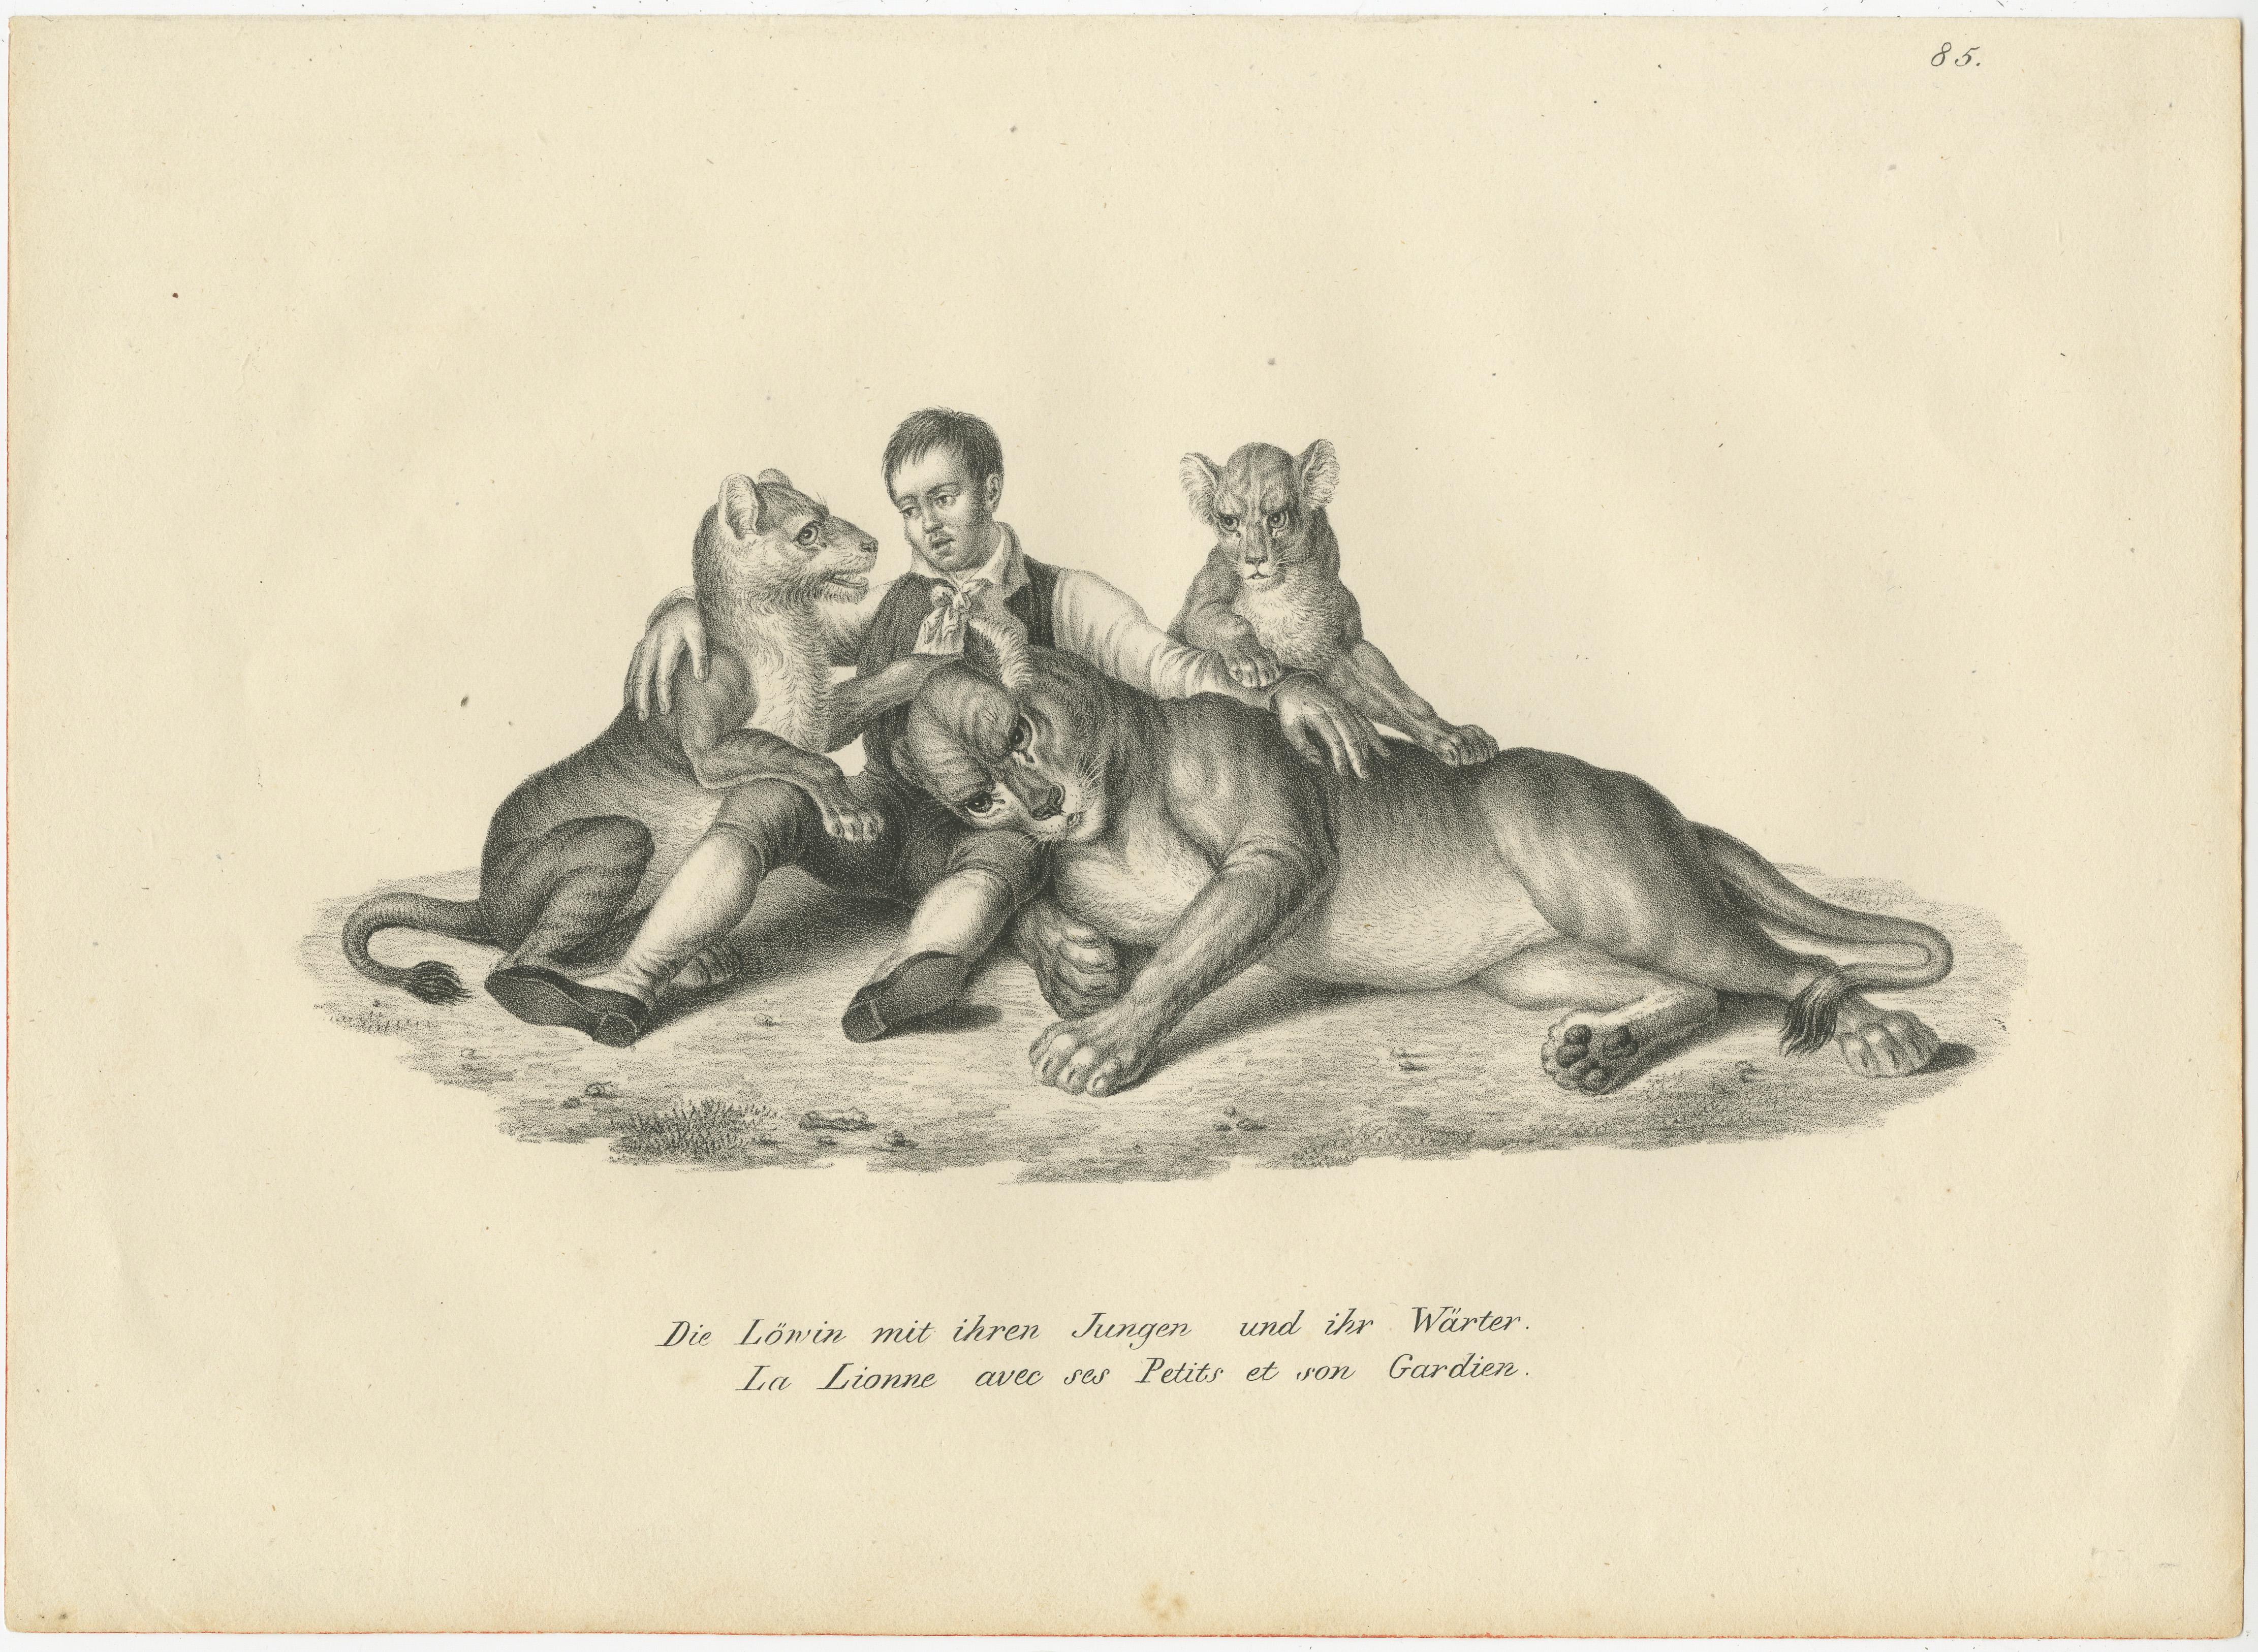 Original antique print titled 'Die Löwin mit ihren Jungen und ihr Wärter (..)'. Original antique print of a lioness and her cubs and trainer. Published by Karl Joseph Brodtmann, circa 1830.